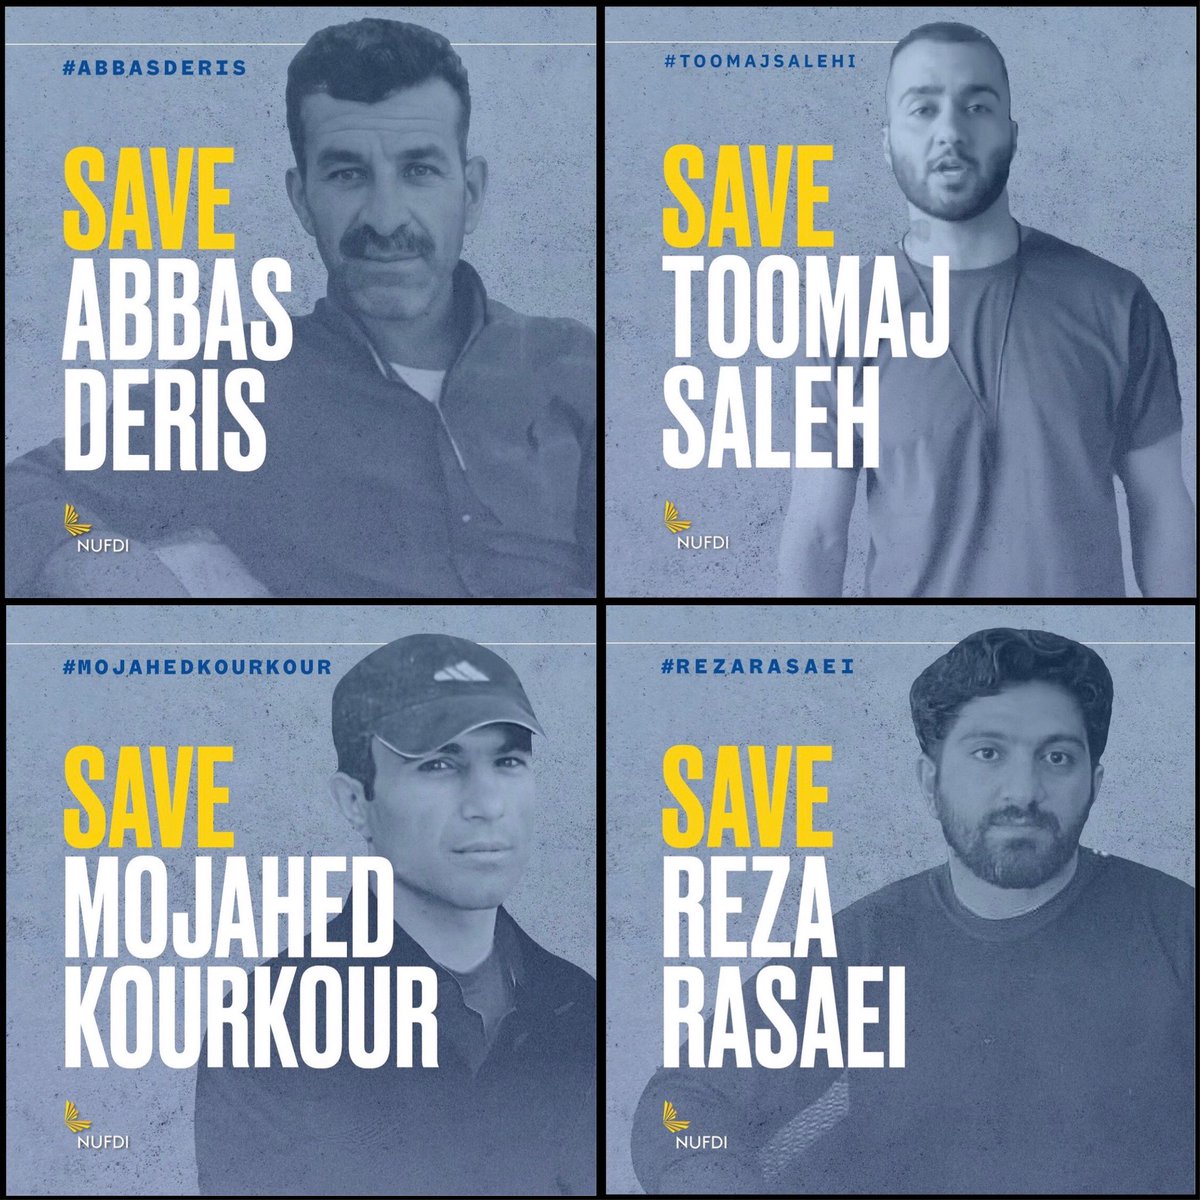 🚨 Urgent 🚨
#ToomajSalehi #RezaRasaei #MojahedKourkour #AbbasDeris lives are at imminent risk of execution by the Islamic regime in Iran at any moment!

Be their voice to save their lives!
@JavaidRehman 
@amnesty
@USEnvoyIran

#CutTheRope